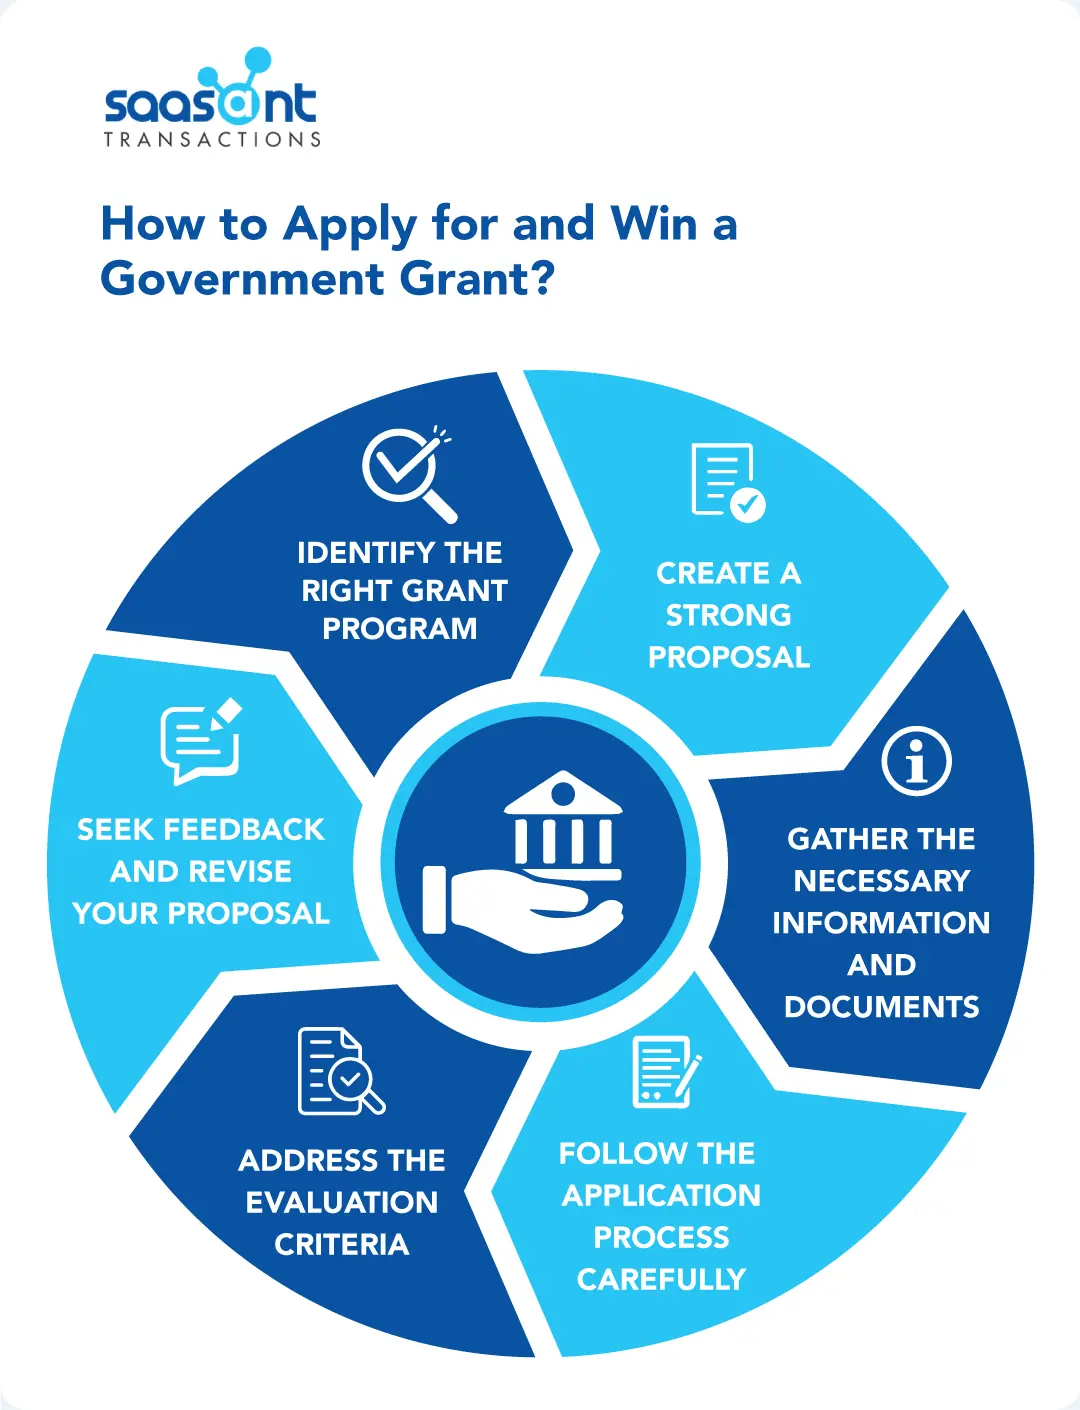 How to Apply for and Win a Government Grant